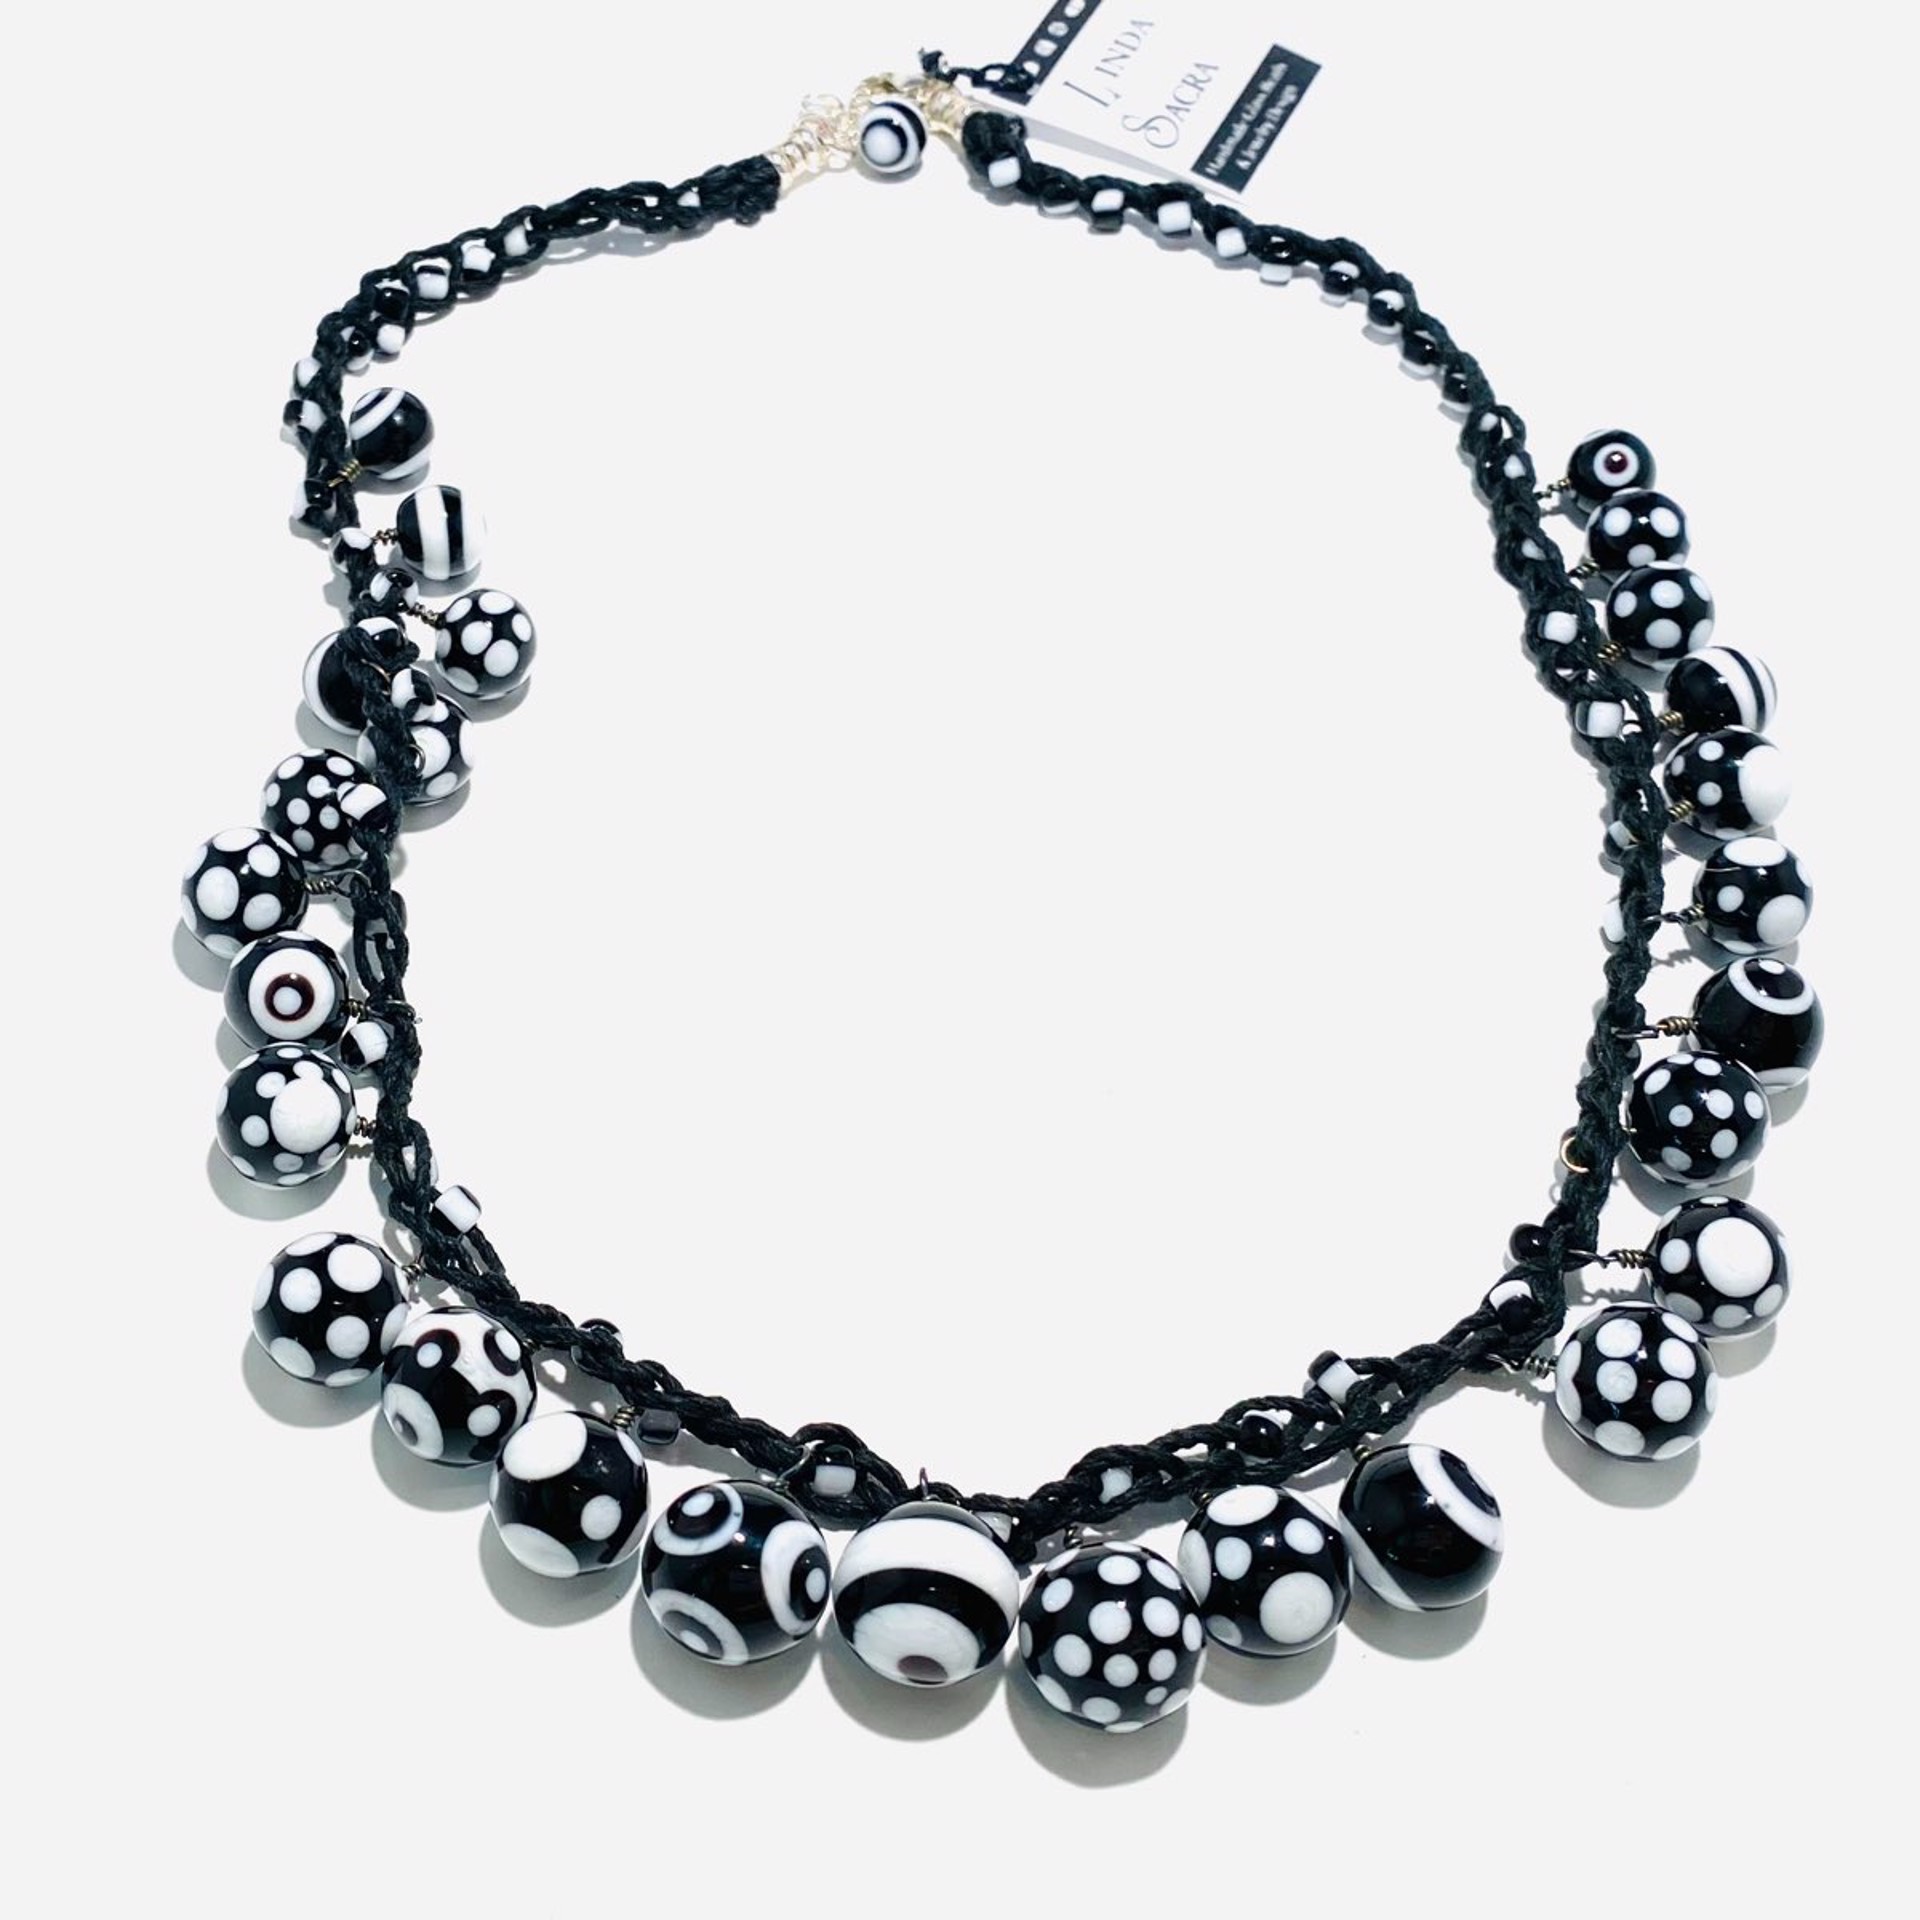 Black and White Bubble Beads, Crotched Necklace LS22-475 by Linda Sacra